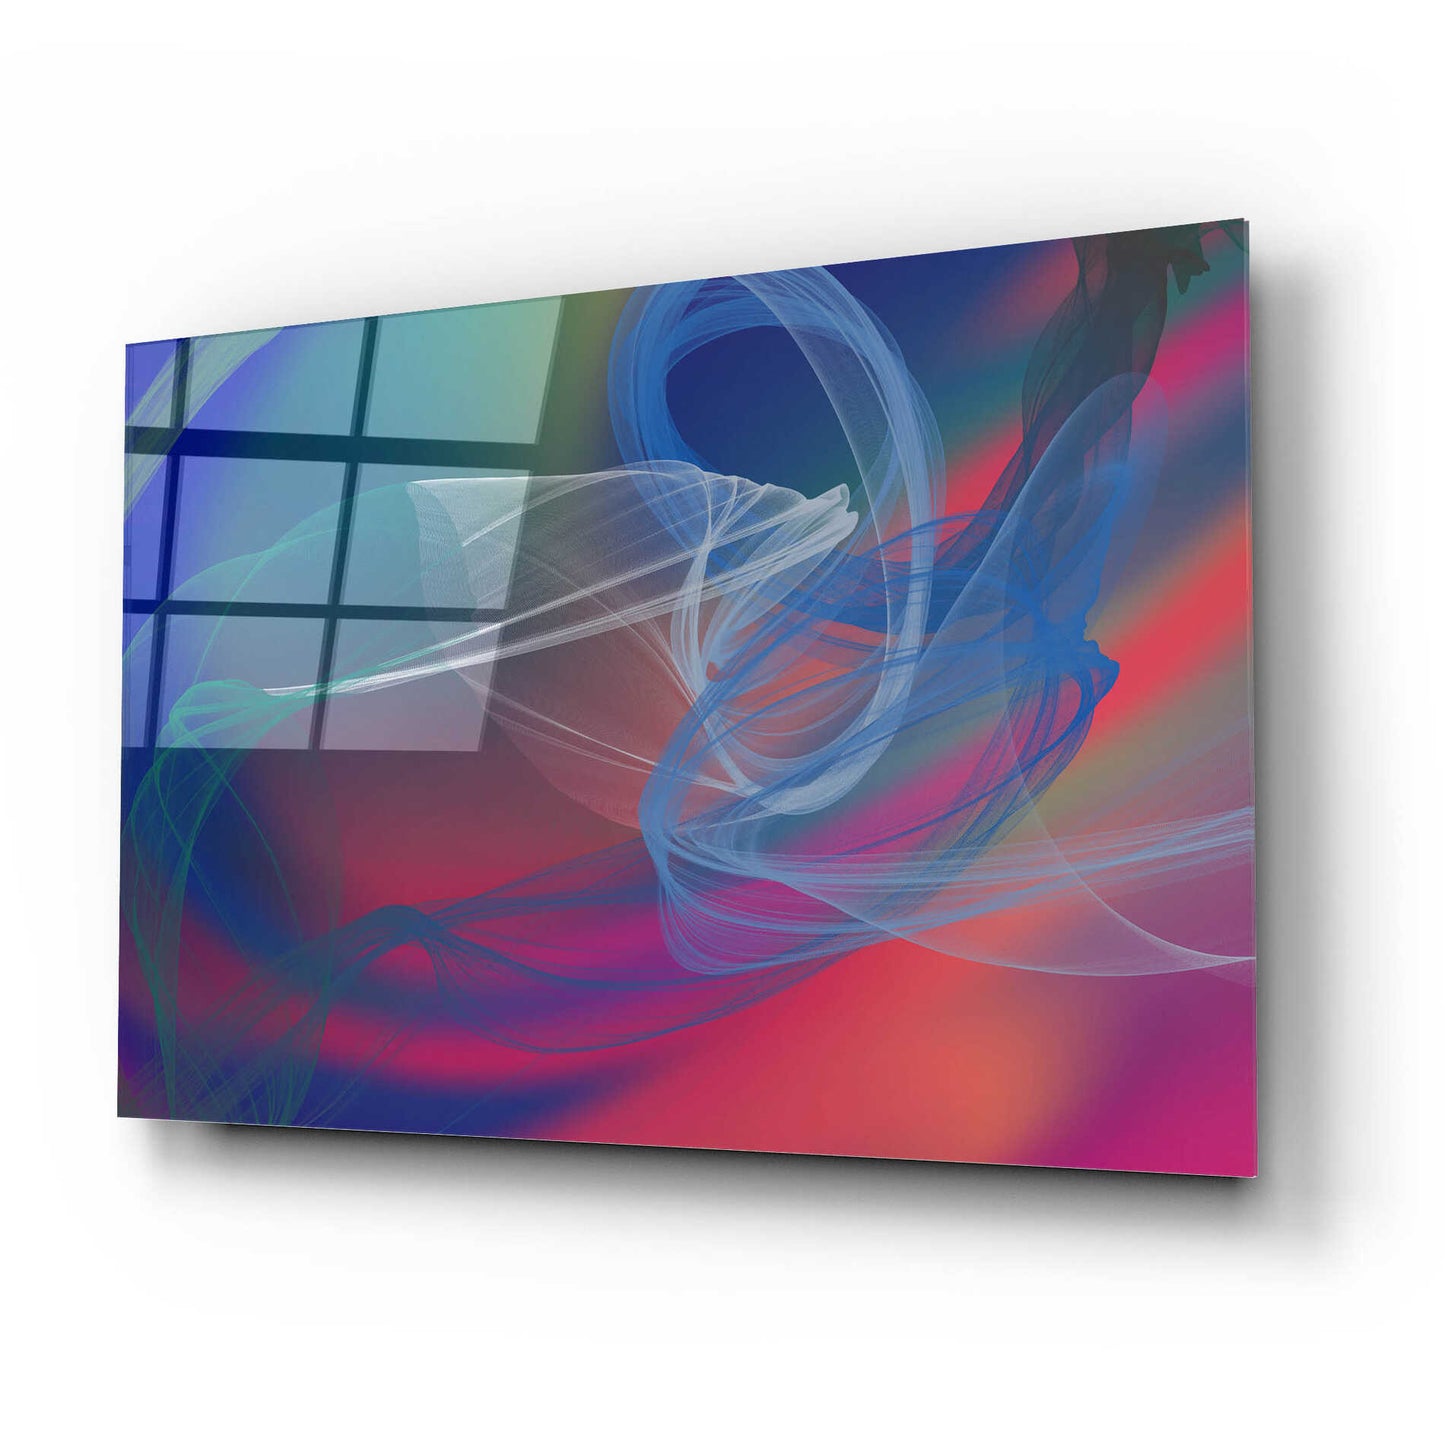 Epic Art 'Inverted Color In The Lines 4' by Irena Orlov Acrylic Glass Wall Art,24x16